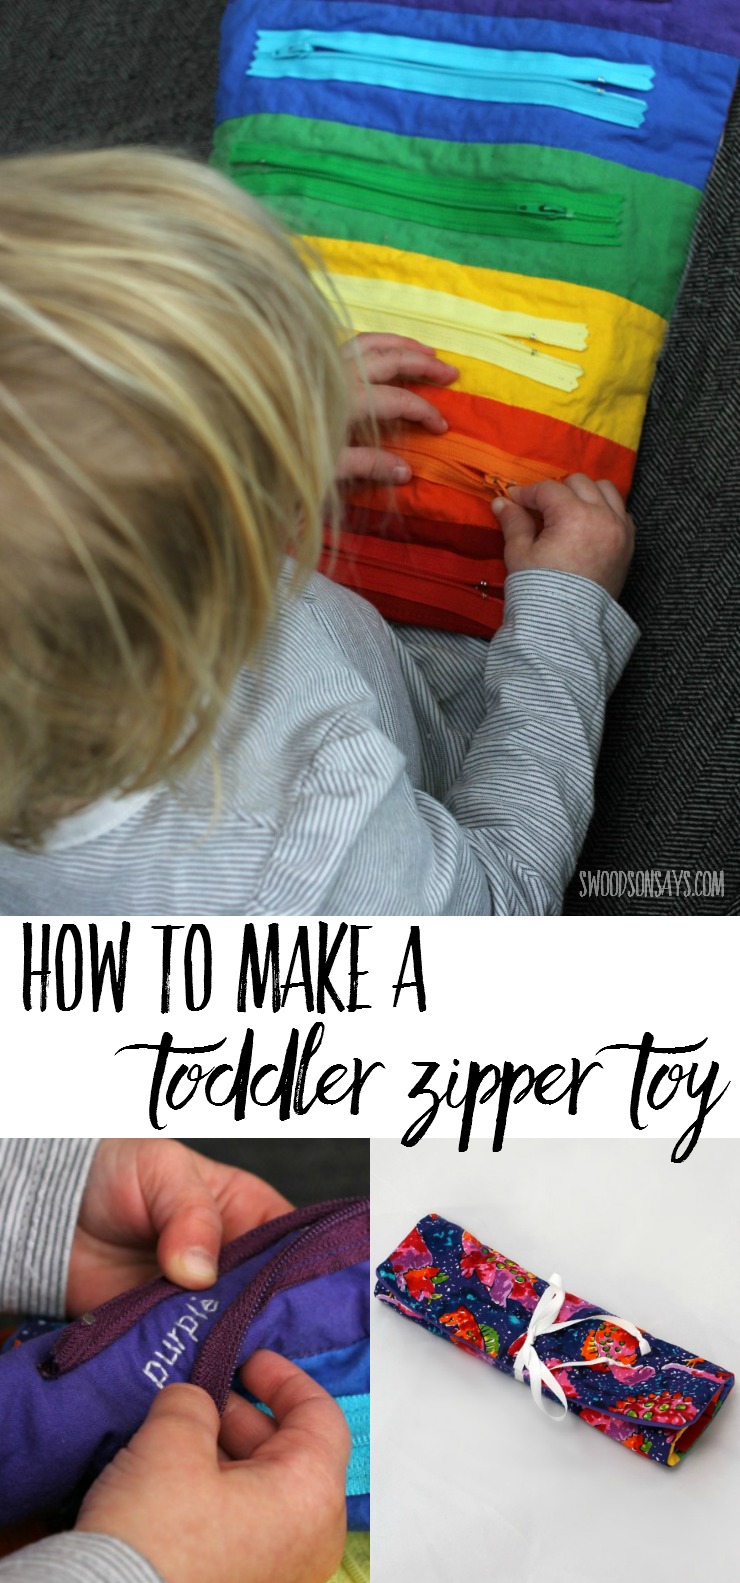 Use this zipper toy tutorial to sew a toddler toy! A few zippers and some embroidered words will make learning colors fun, and it rolls up easily to tuck into a purse or bag for entertainment on the go. 